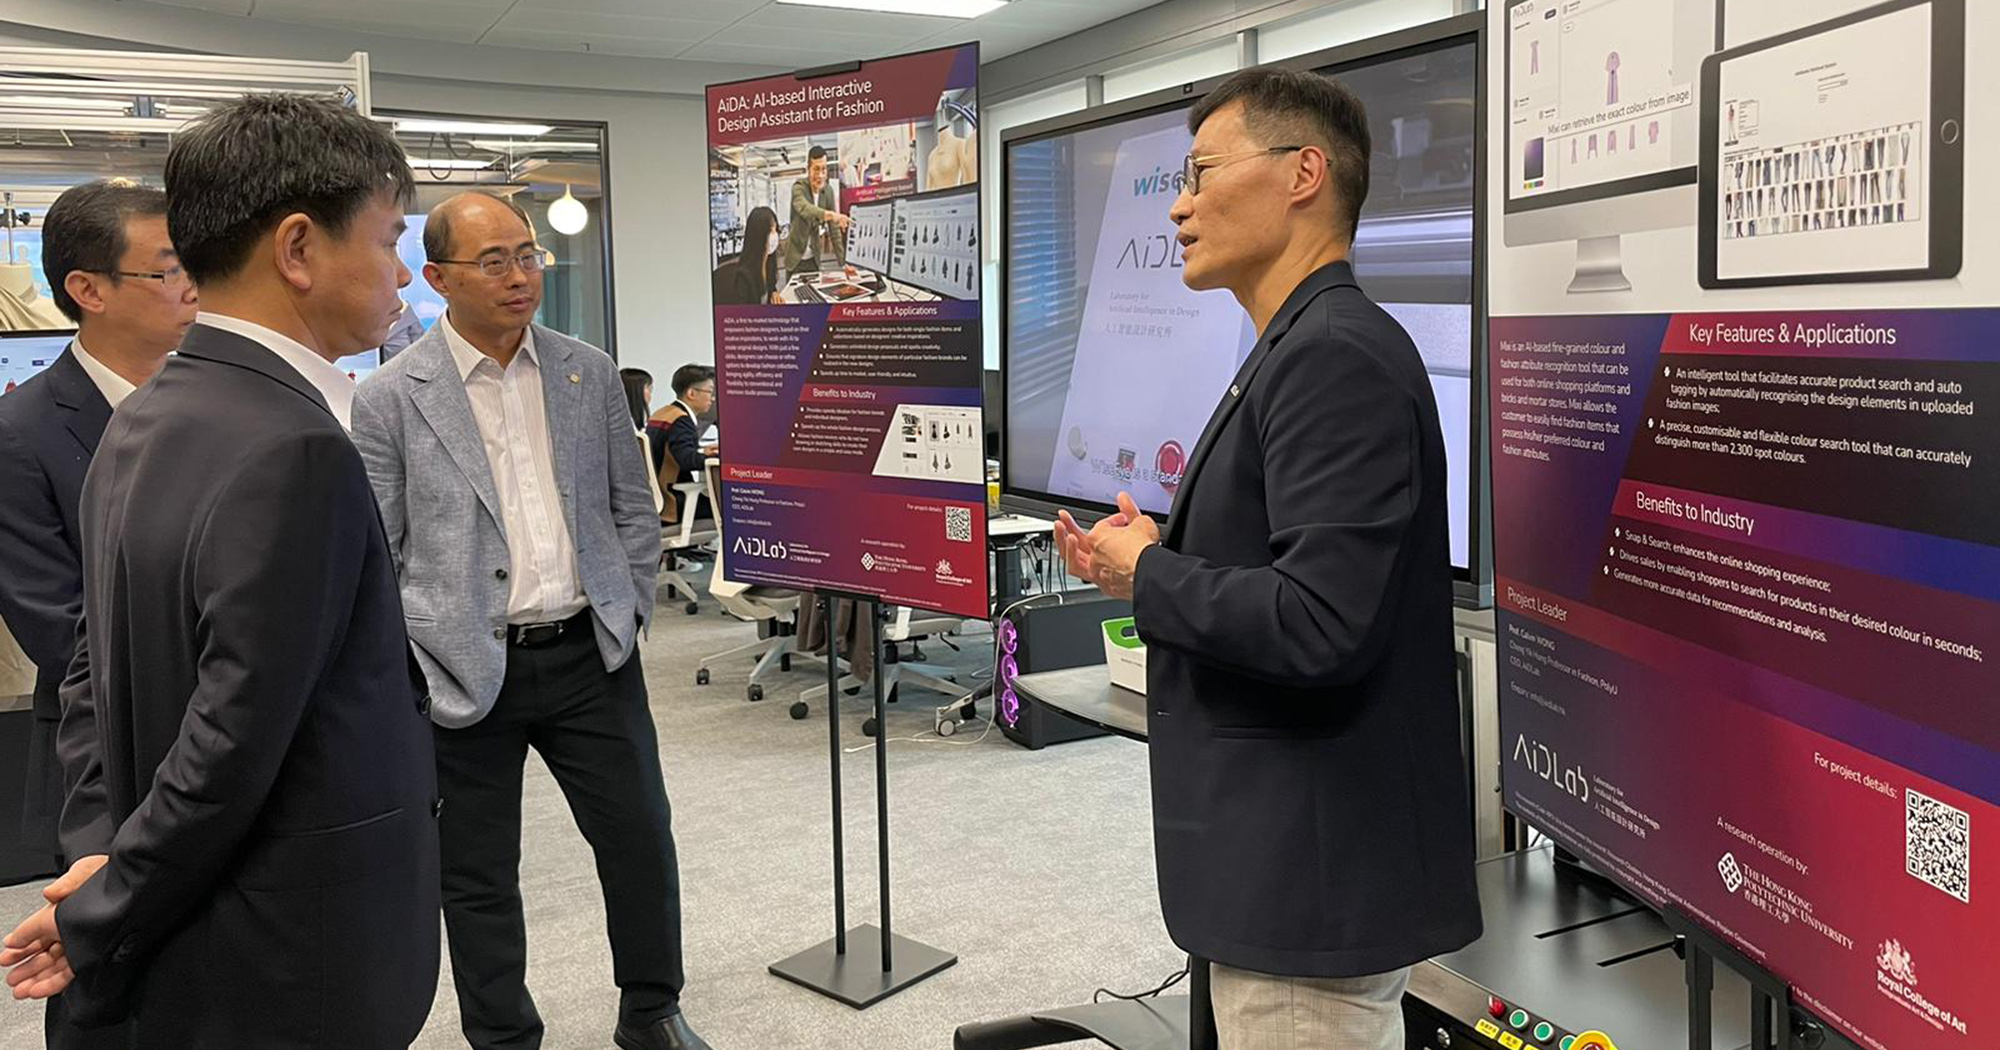 On the first day of the visit on 26 June, the Jinjiang delegation visited the Laboratory for Artificial Intelligence in Design at the Hong Kong Science Park, gaining insights into PolyU’s interdisciplinary research, achievements in industry-academia-research collaboration, as well as its future development plans. The research centre is co-founded by the University and world-leading institutions under the InnoHK initiative. 